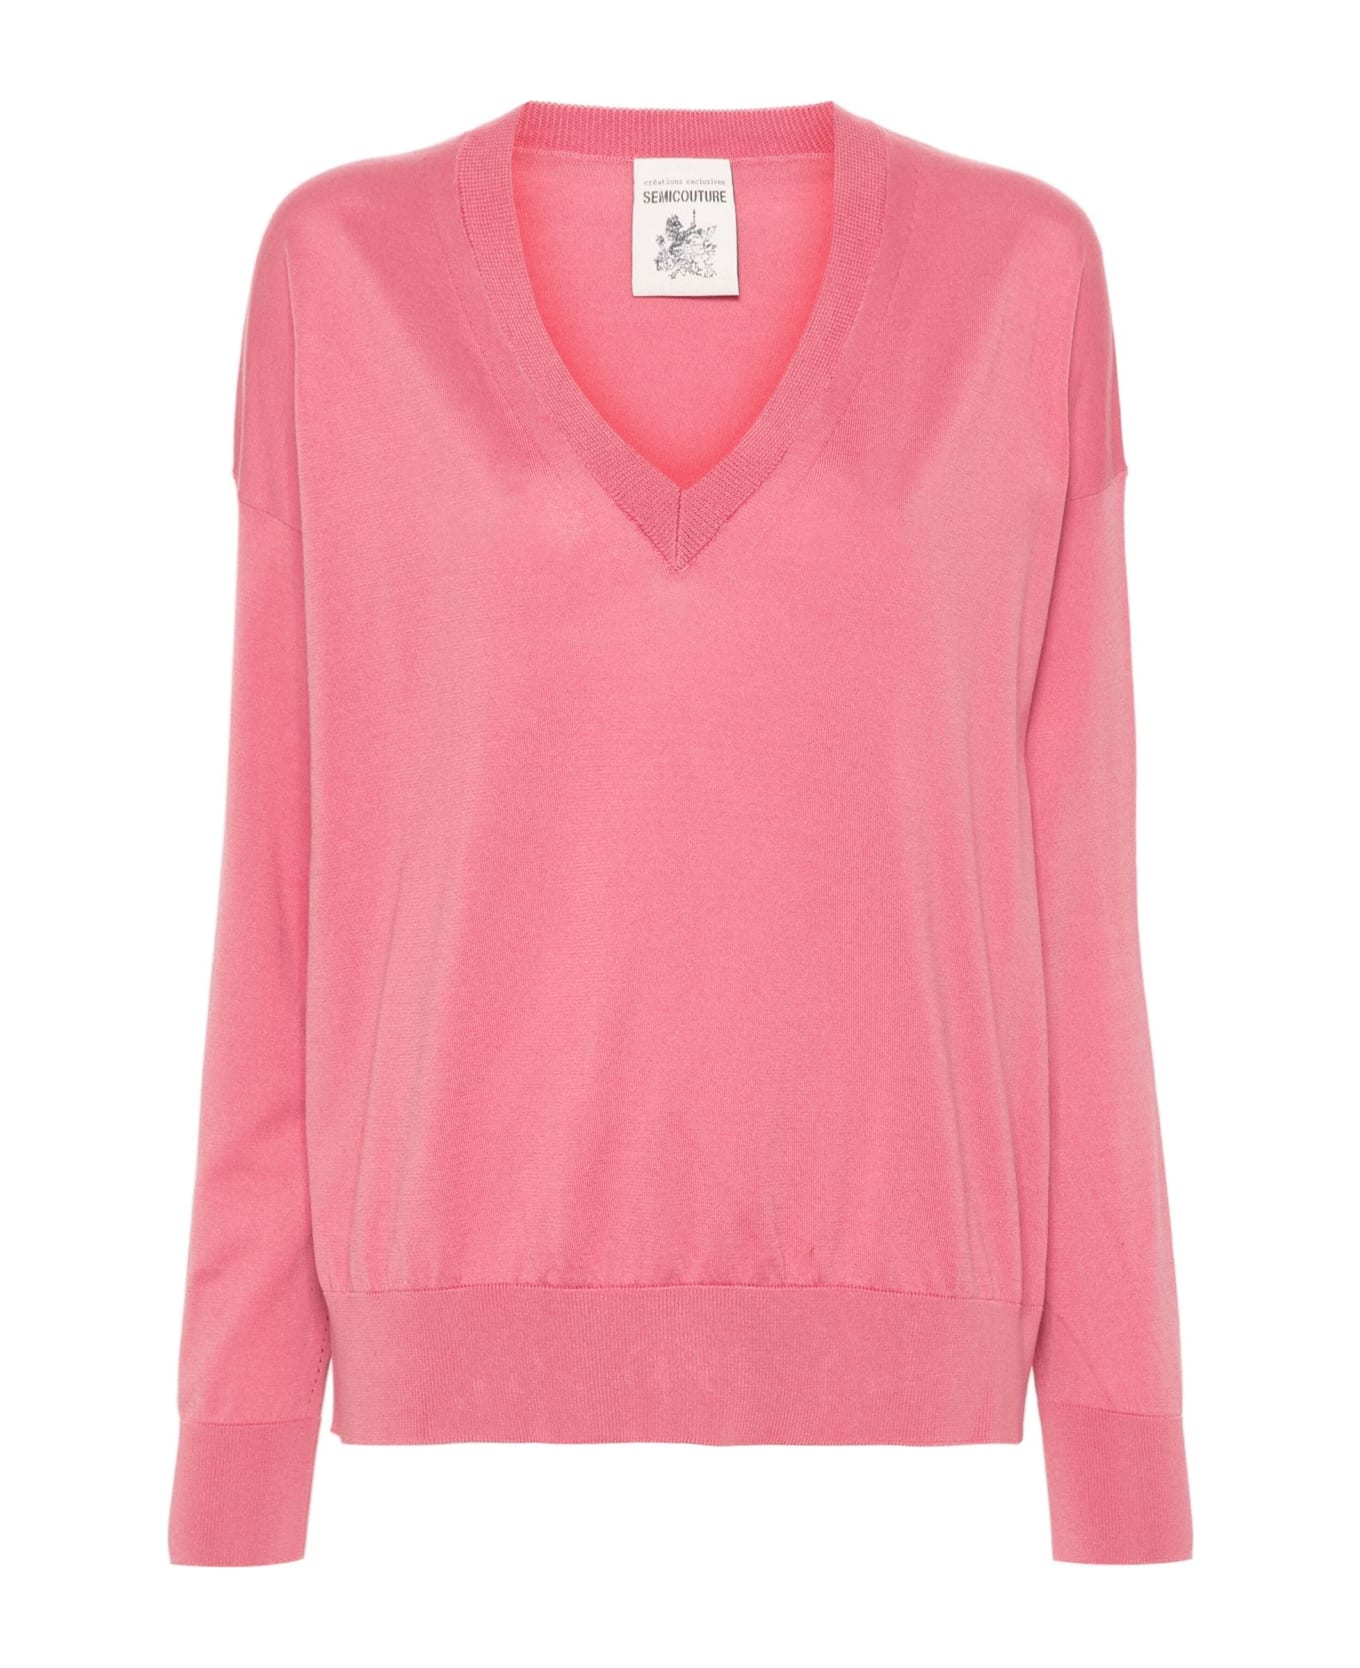 SEMICOUTURE Pink Cotton Sweater - Pink ニットウェア